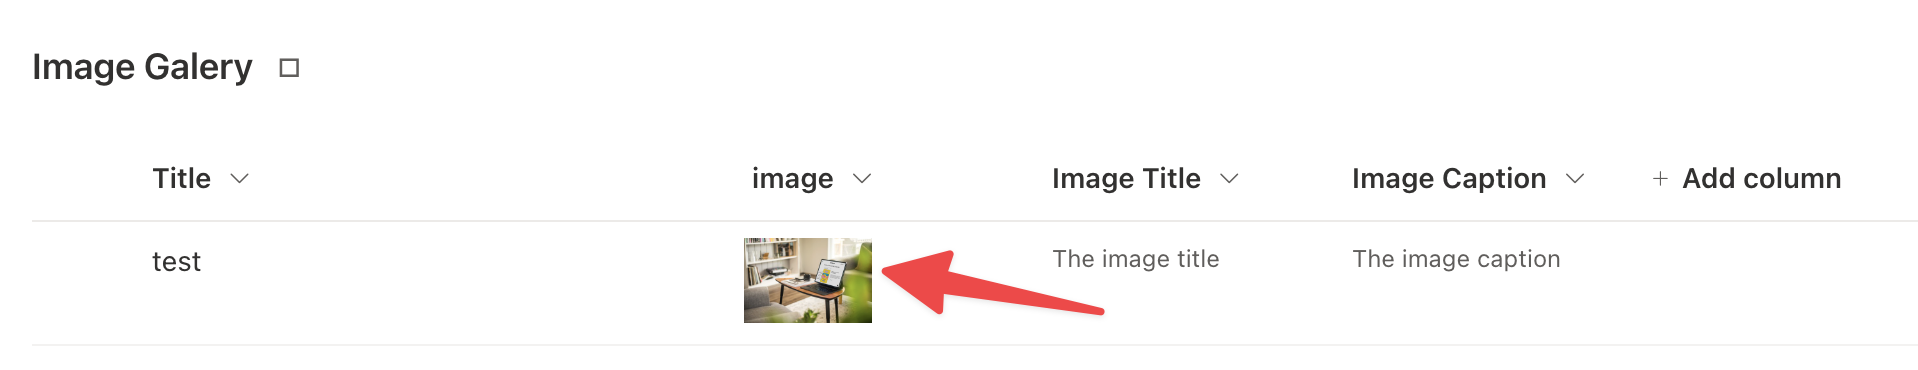 SharePoint list view pointing to a image column with images